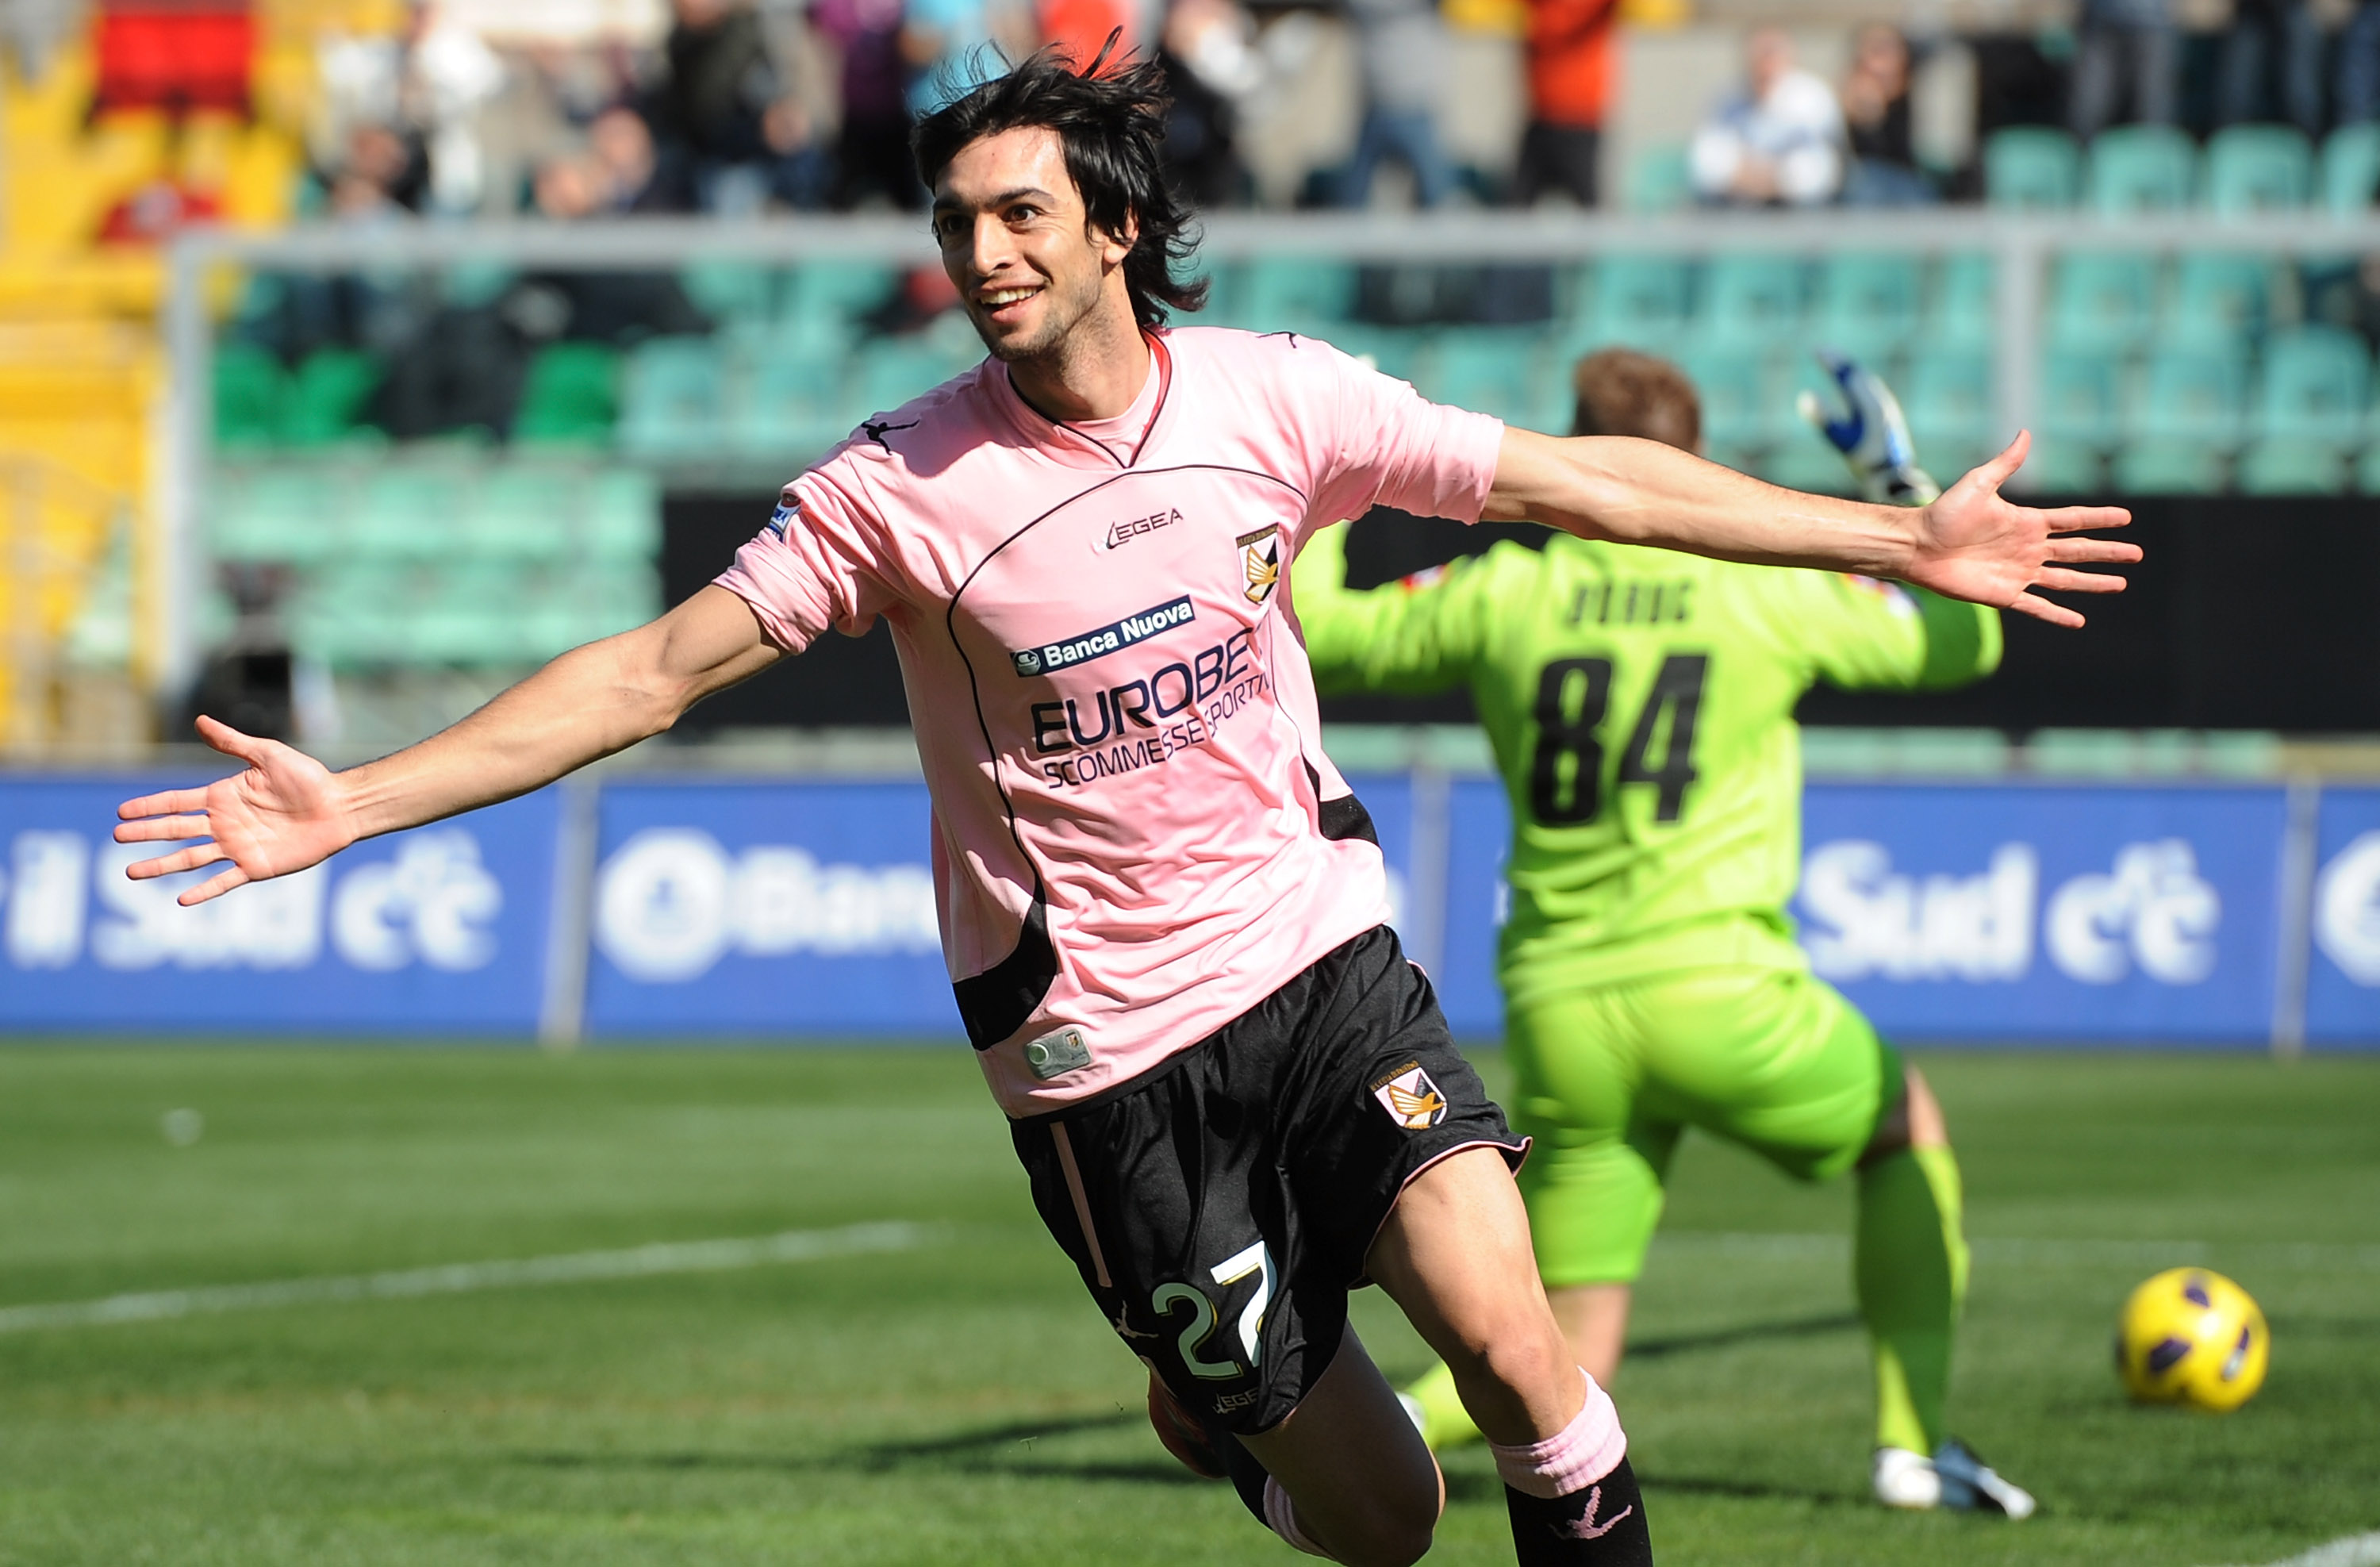 PALERMO, ITALY - FEBRUARY 13:  Javier Pastore of Palermo celebrates after scoring the opening goal during the Serie A match between US Citta di Palermo and ACF Fiorentina at Stadio Renzo Barbera on February 13, 2011 in Palermo, Italy.  (Photo by Tullio M.